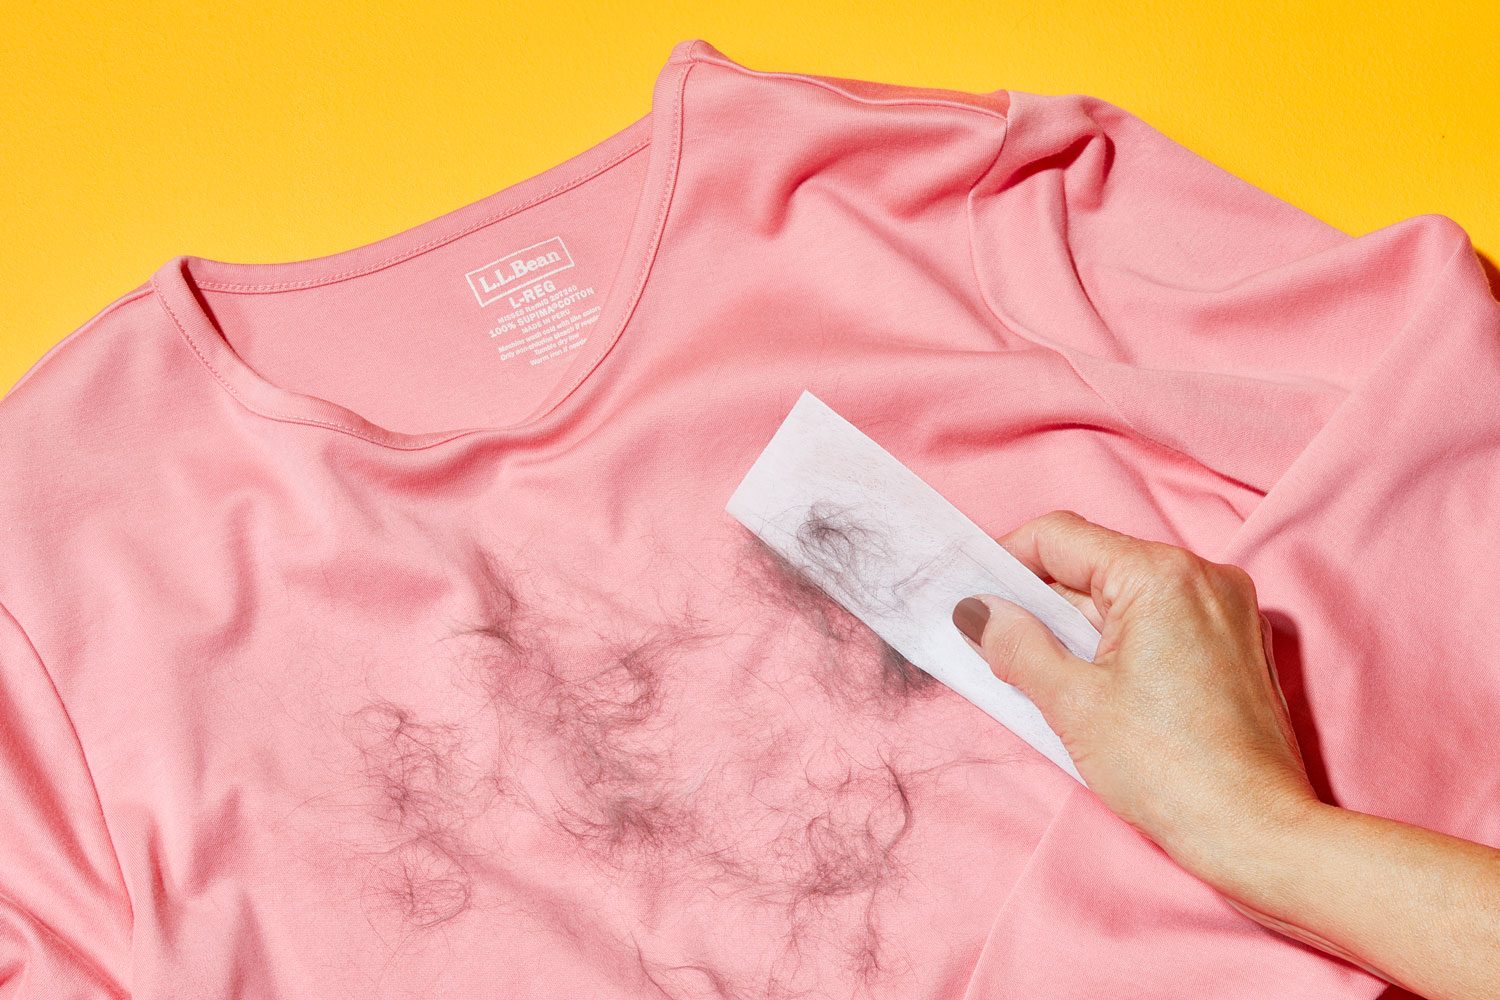 hand using dryer sheet to remove pet hair from a pink shirt on orange background